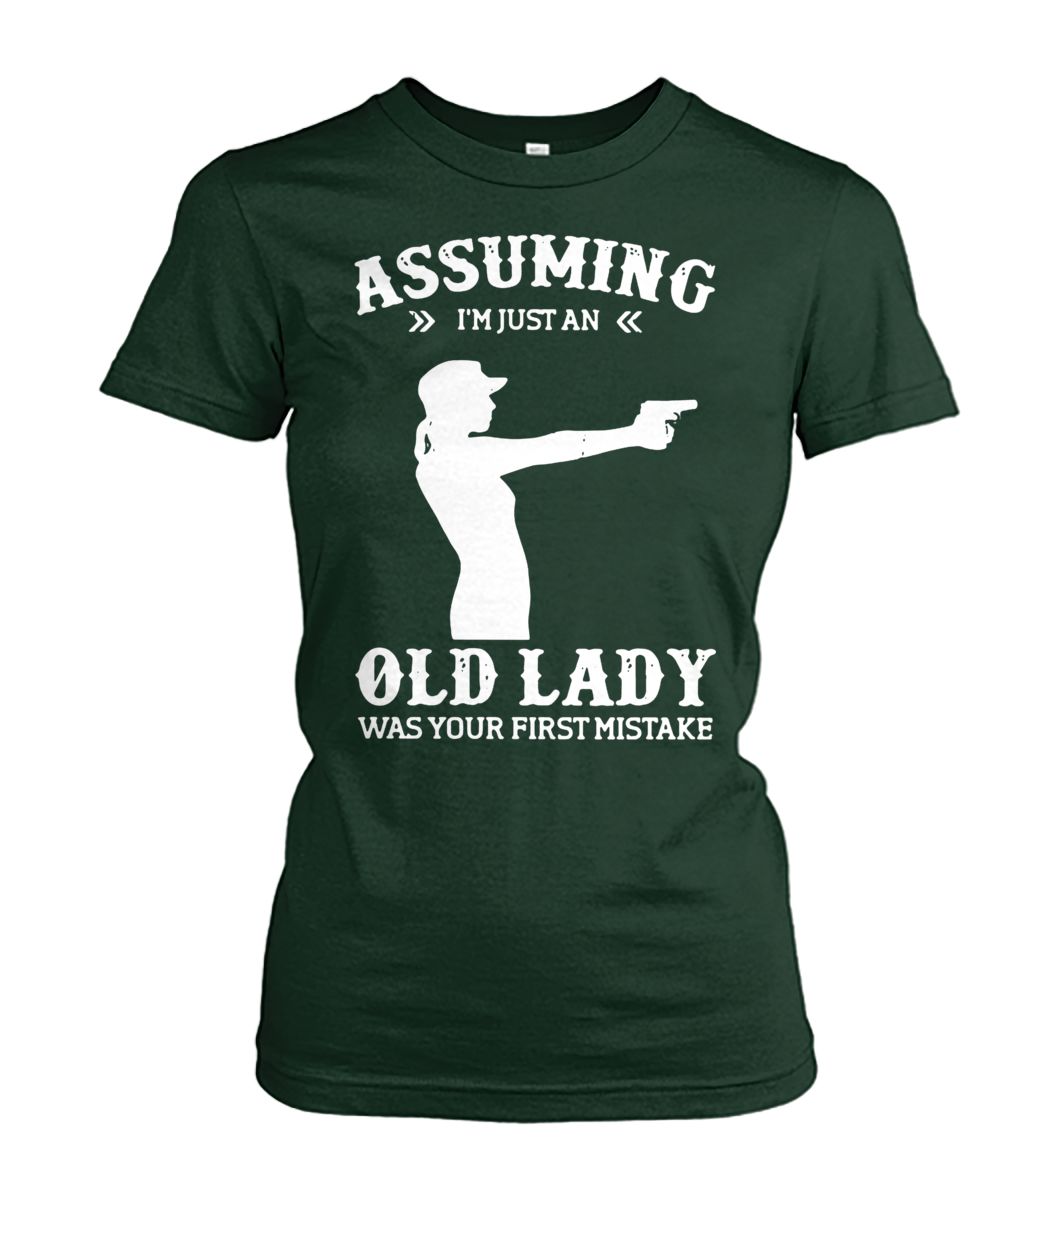 Gun girl assuming I'm just an old lady was your first mistake women's crew tee